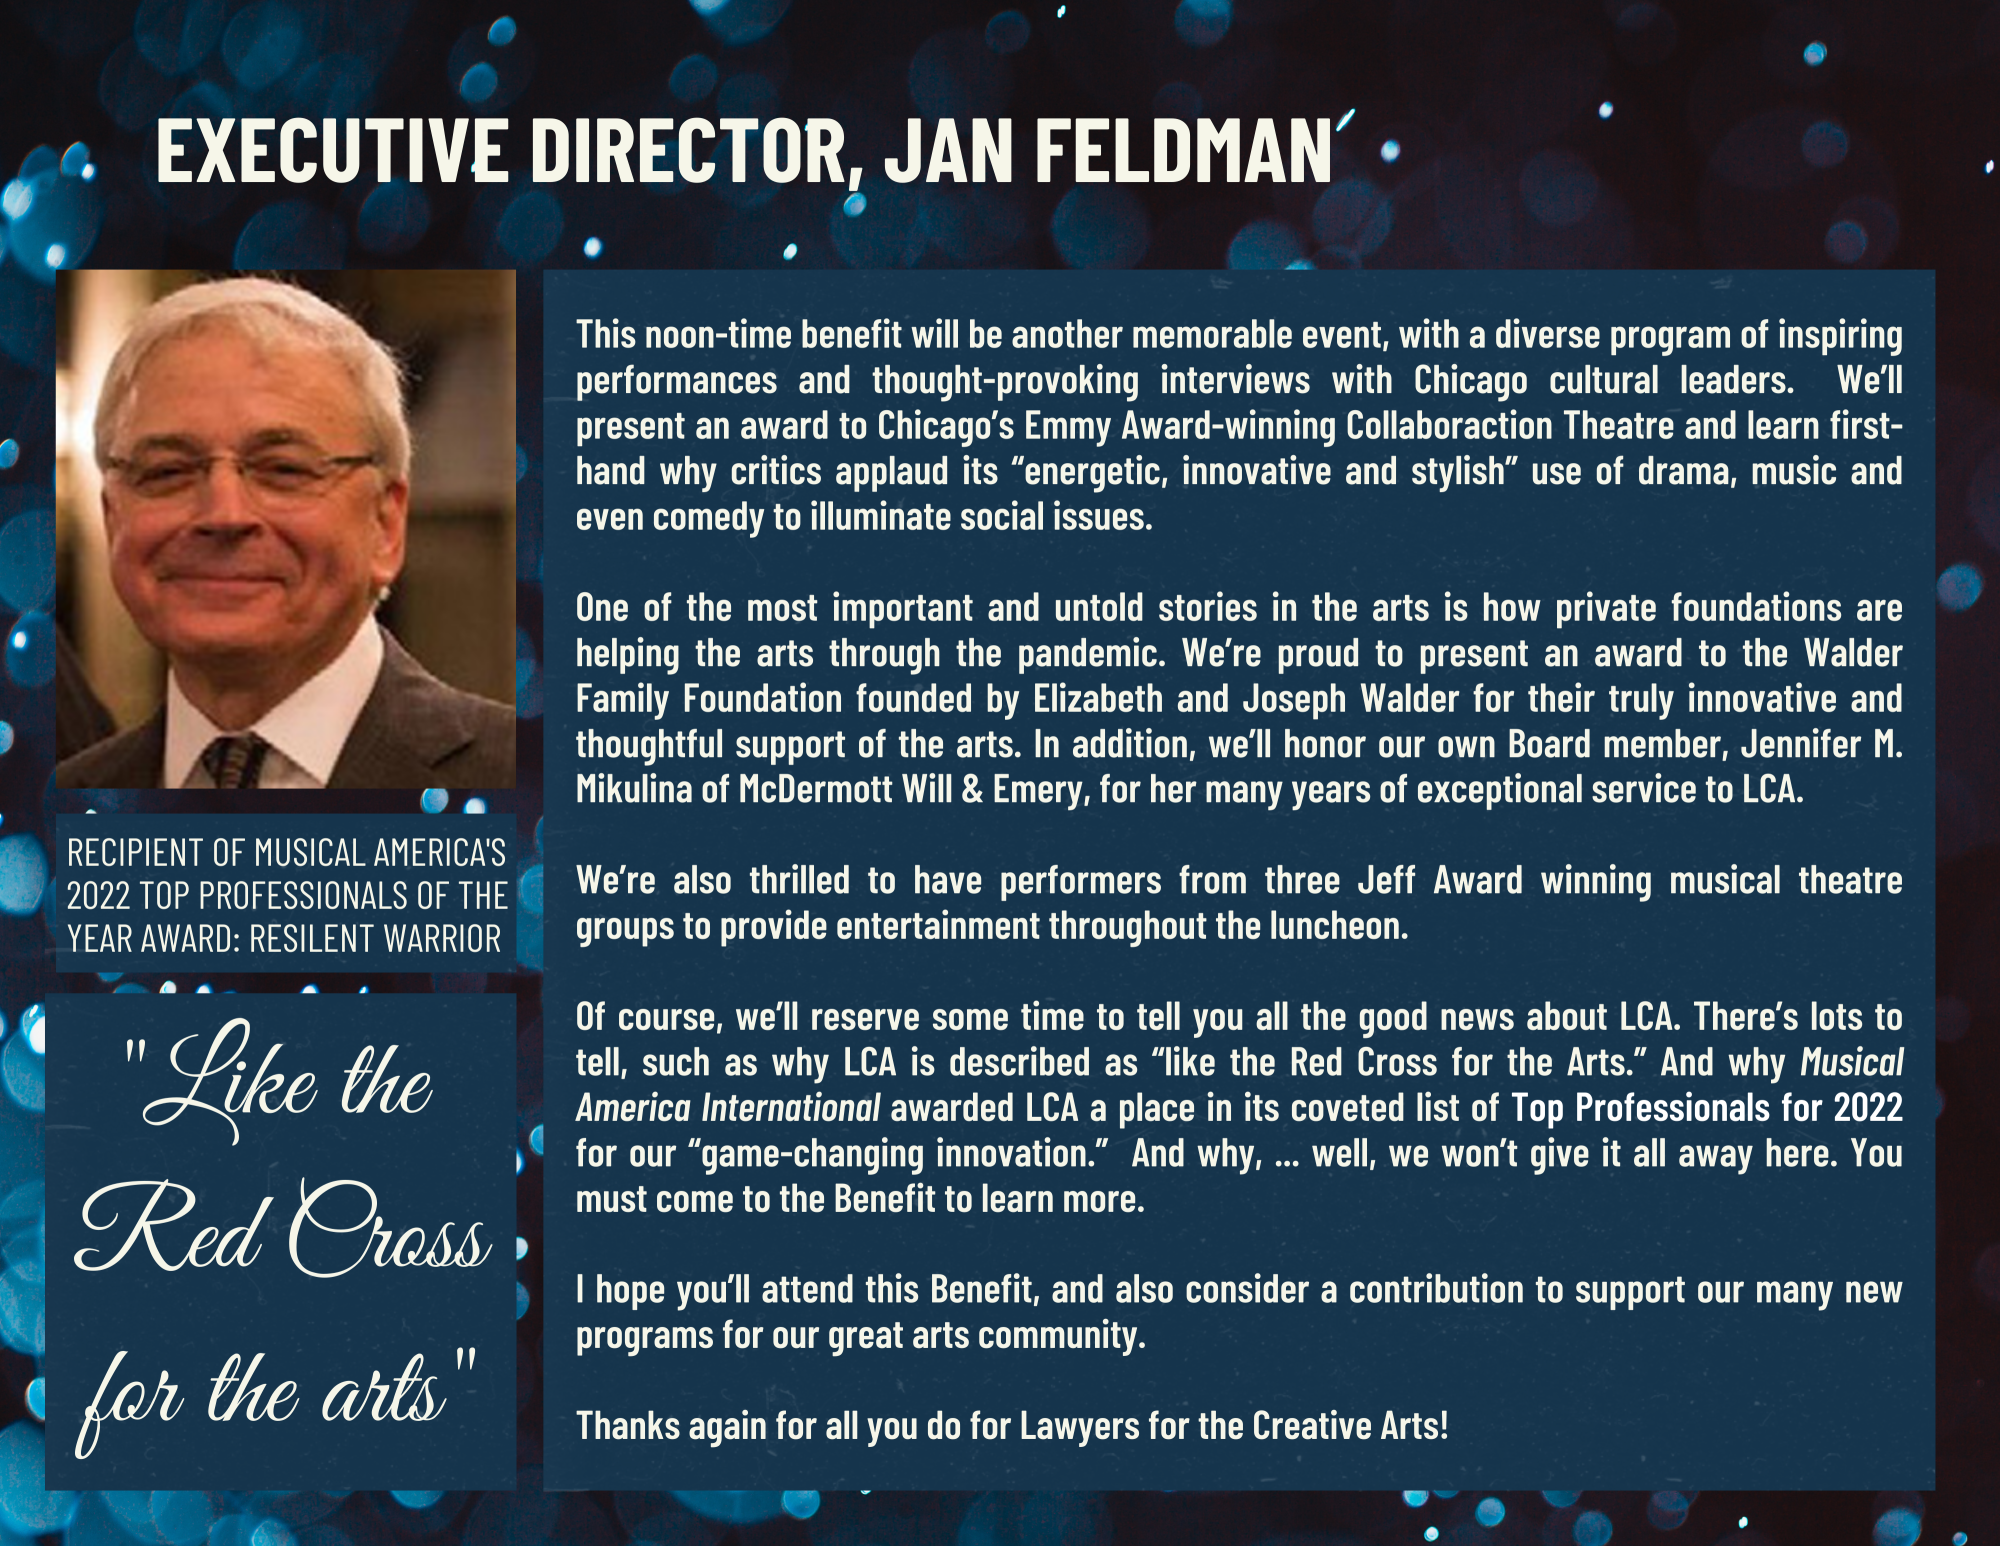 Letter from Executive Director, Jan Feldman. This noon-time benefit will be another memorable event, with a diverse program of inspiring performances and thought-provoking interviews with Chicago cultural leaders.  We’ll present an award to Chicago’s Emmy Award-winning Collaboraction Theatre and learn first-hand why critics applaud its “energetic, innovative and stylish” use of drama, music and even comedy to illuminate social issues. One of the most important and untold stories in the arts is how private foundations are helping the arts through the pandemic. We’re proud to present an award to the Walder Family Foundation founded by Elizabeth and Joseph Walder for their truly innovative and thoughtful support of the arts. In addition, we’ll honor our own Board member, Jennifer M. Mikulina of McDermott Will & Emery, for her many years of exceptional service to LCA. We’re also thrilled to have performers from three Jeff Award winning musical theatre groups to provide us with entertainment throughout the luncheon. Of course, we’ll reserve some time to tell you all the good news about LCA. There’s lots to tell, such as why LCA is described as “like the Red Cross for the Arts.” And why Musical America International awarded LCA a place in its coveted list of Top Professionals for 2022 for our “game-changing innovation.” And why, ... well, we won’t give it all away here. You must come to the Benefit to learn more. I hope you’ll attend this Benefit, and also consider a contribution to support our many new programs for our great arts community. Thanks again for all you do for Lawyers for the Creative Arts!